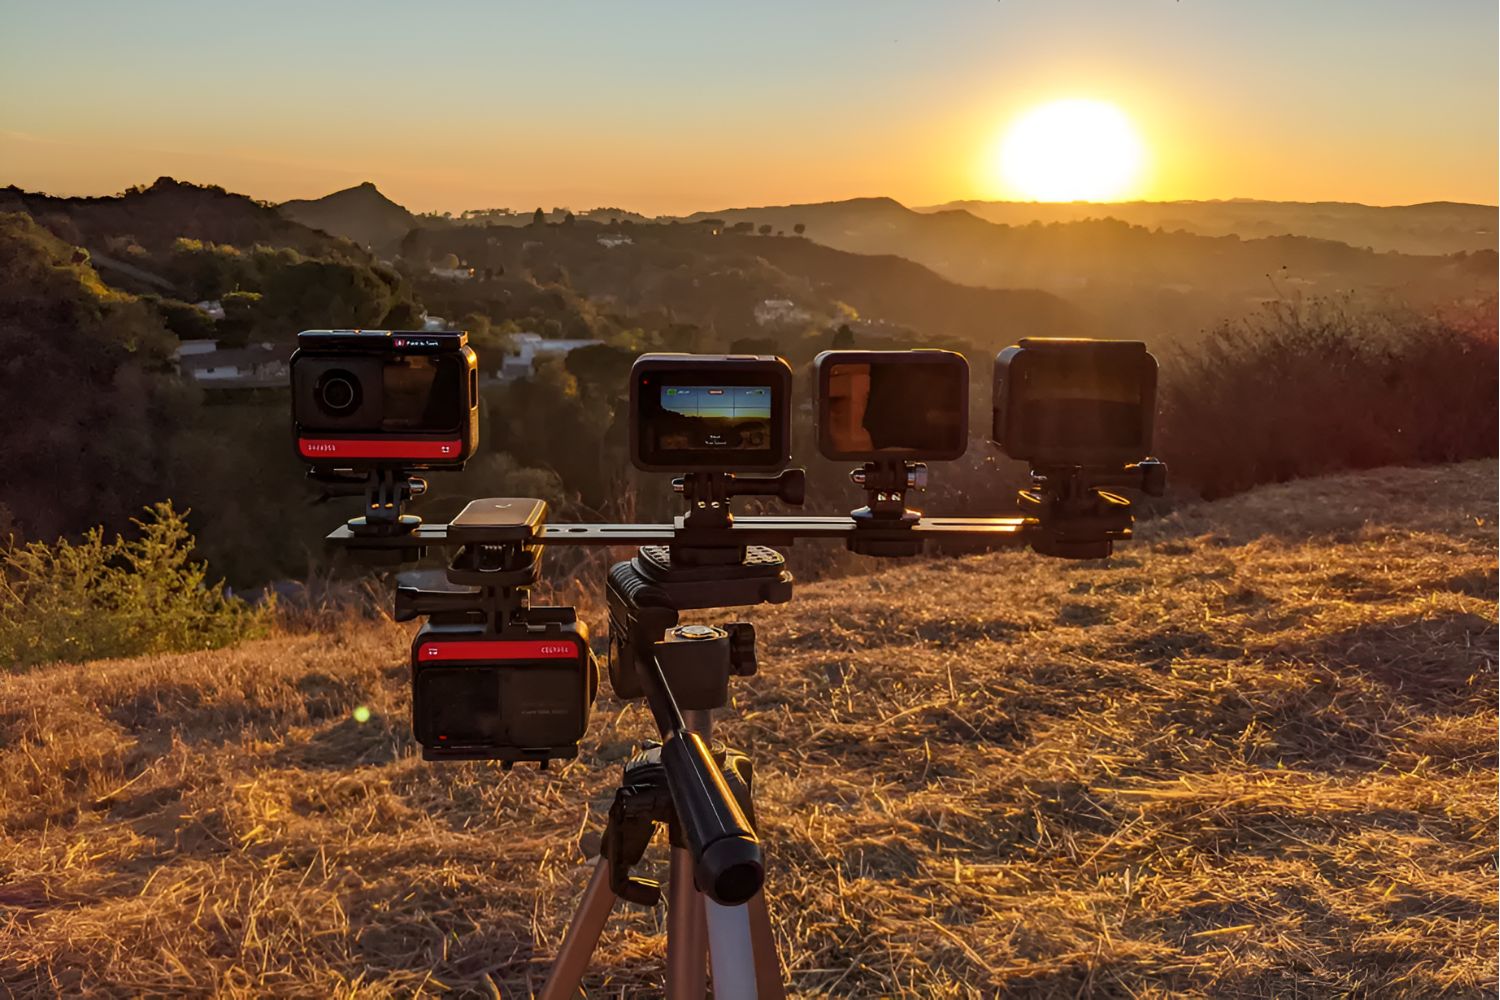 How To Set Up A Live Action Camera